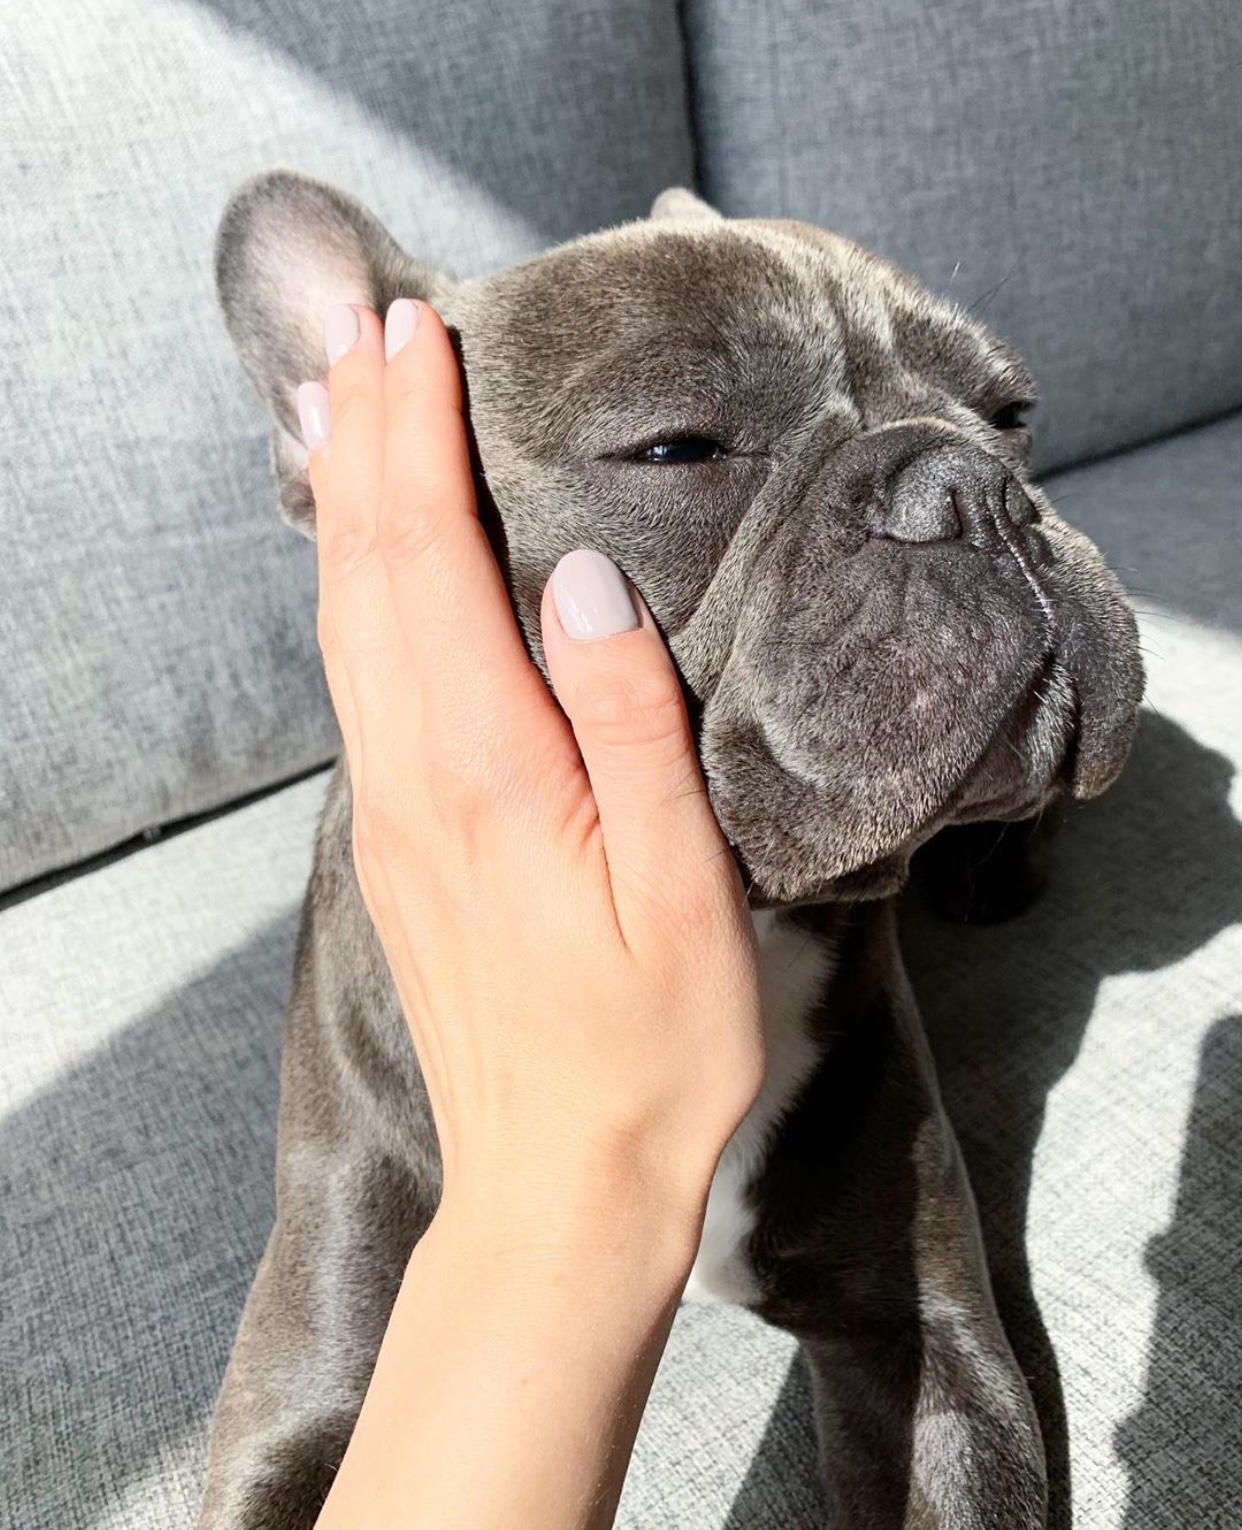 A French Bulldog sitting on the couch while its cheek is being touched by a woman